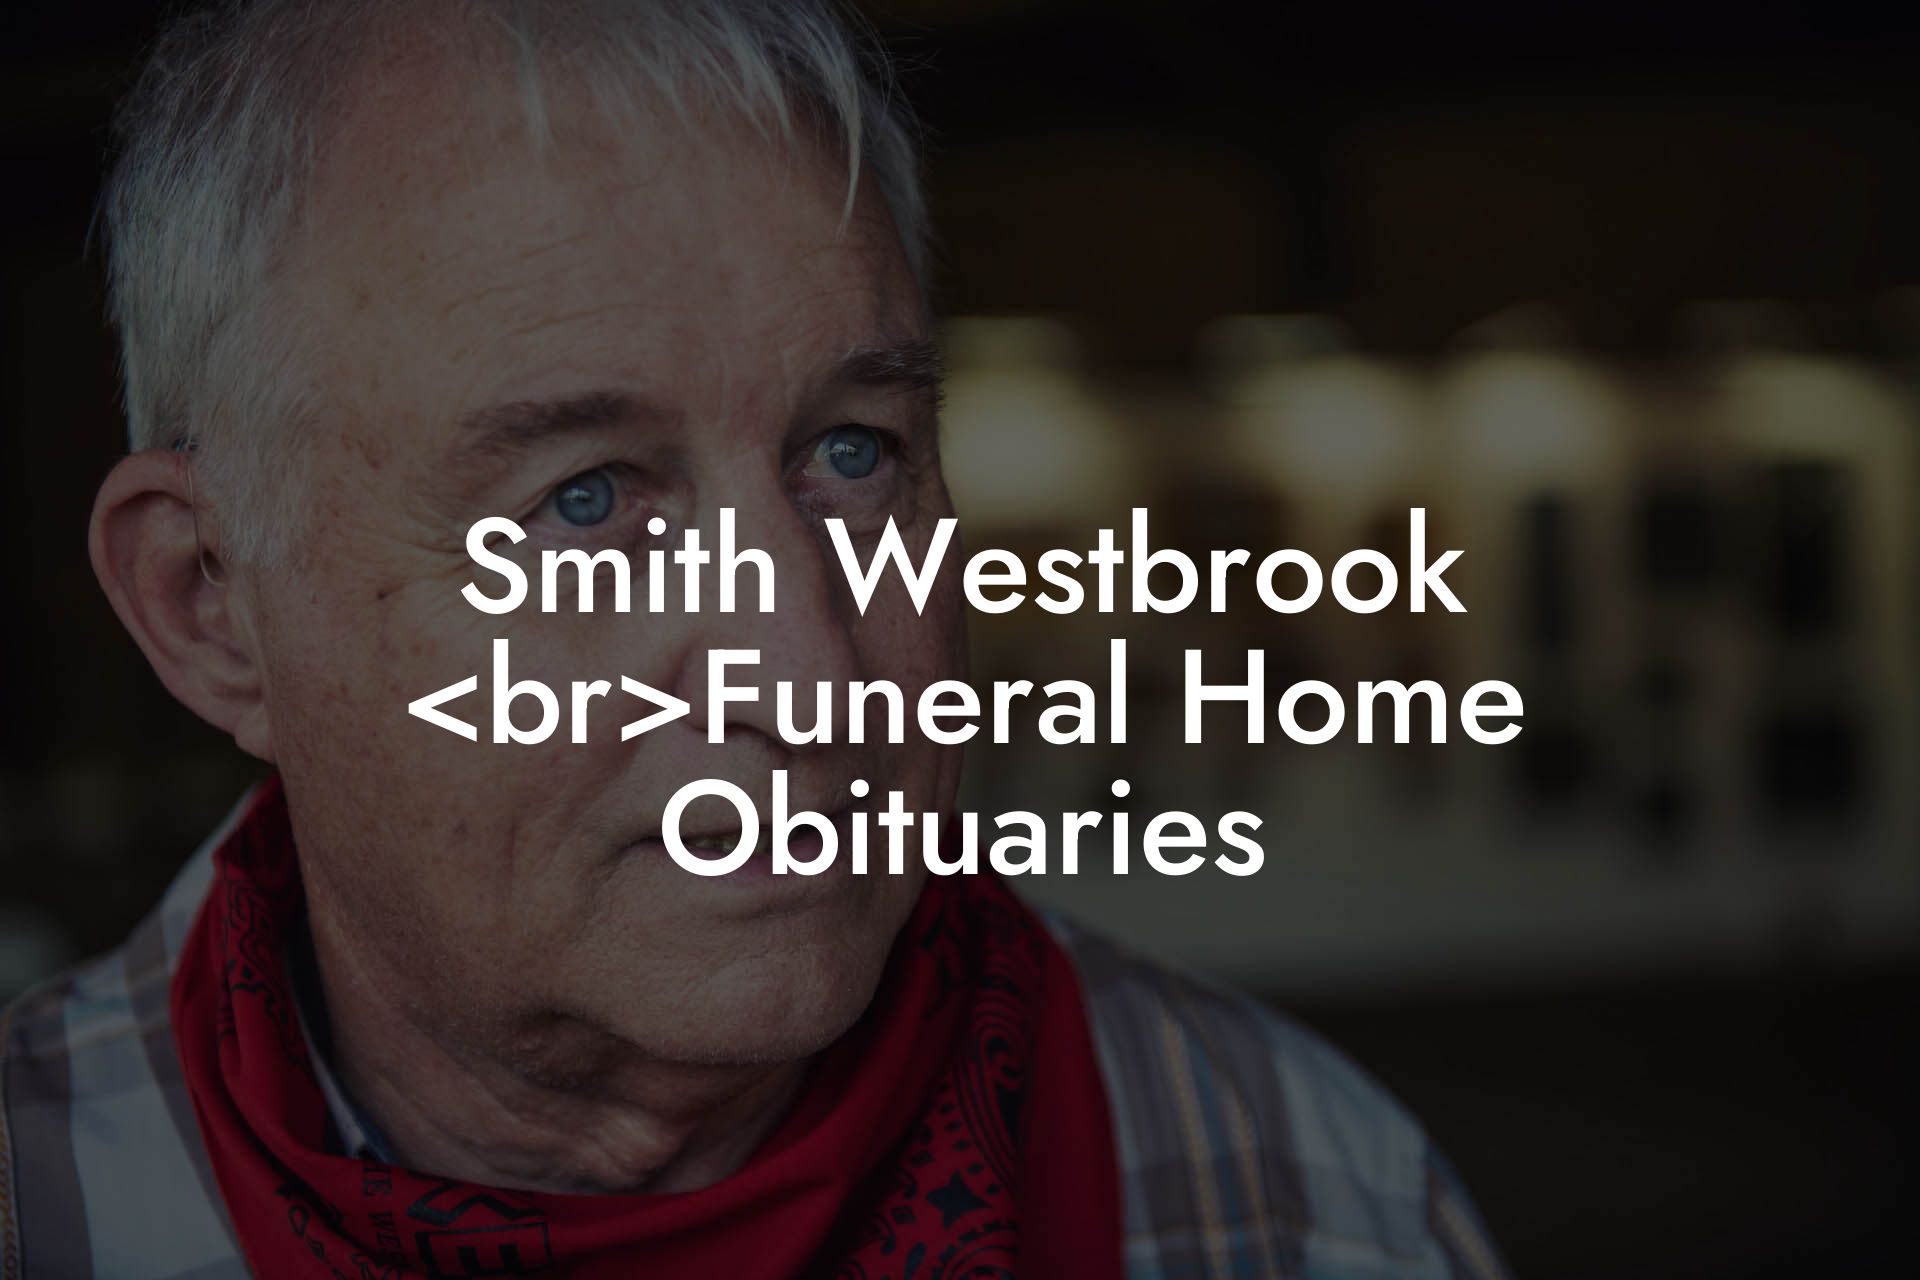 Smith Westbrook Funeral Home Obituaries